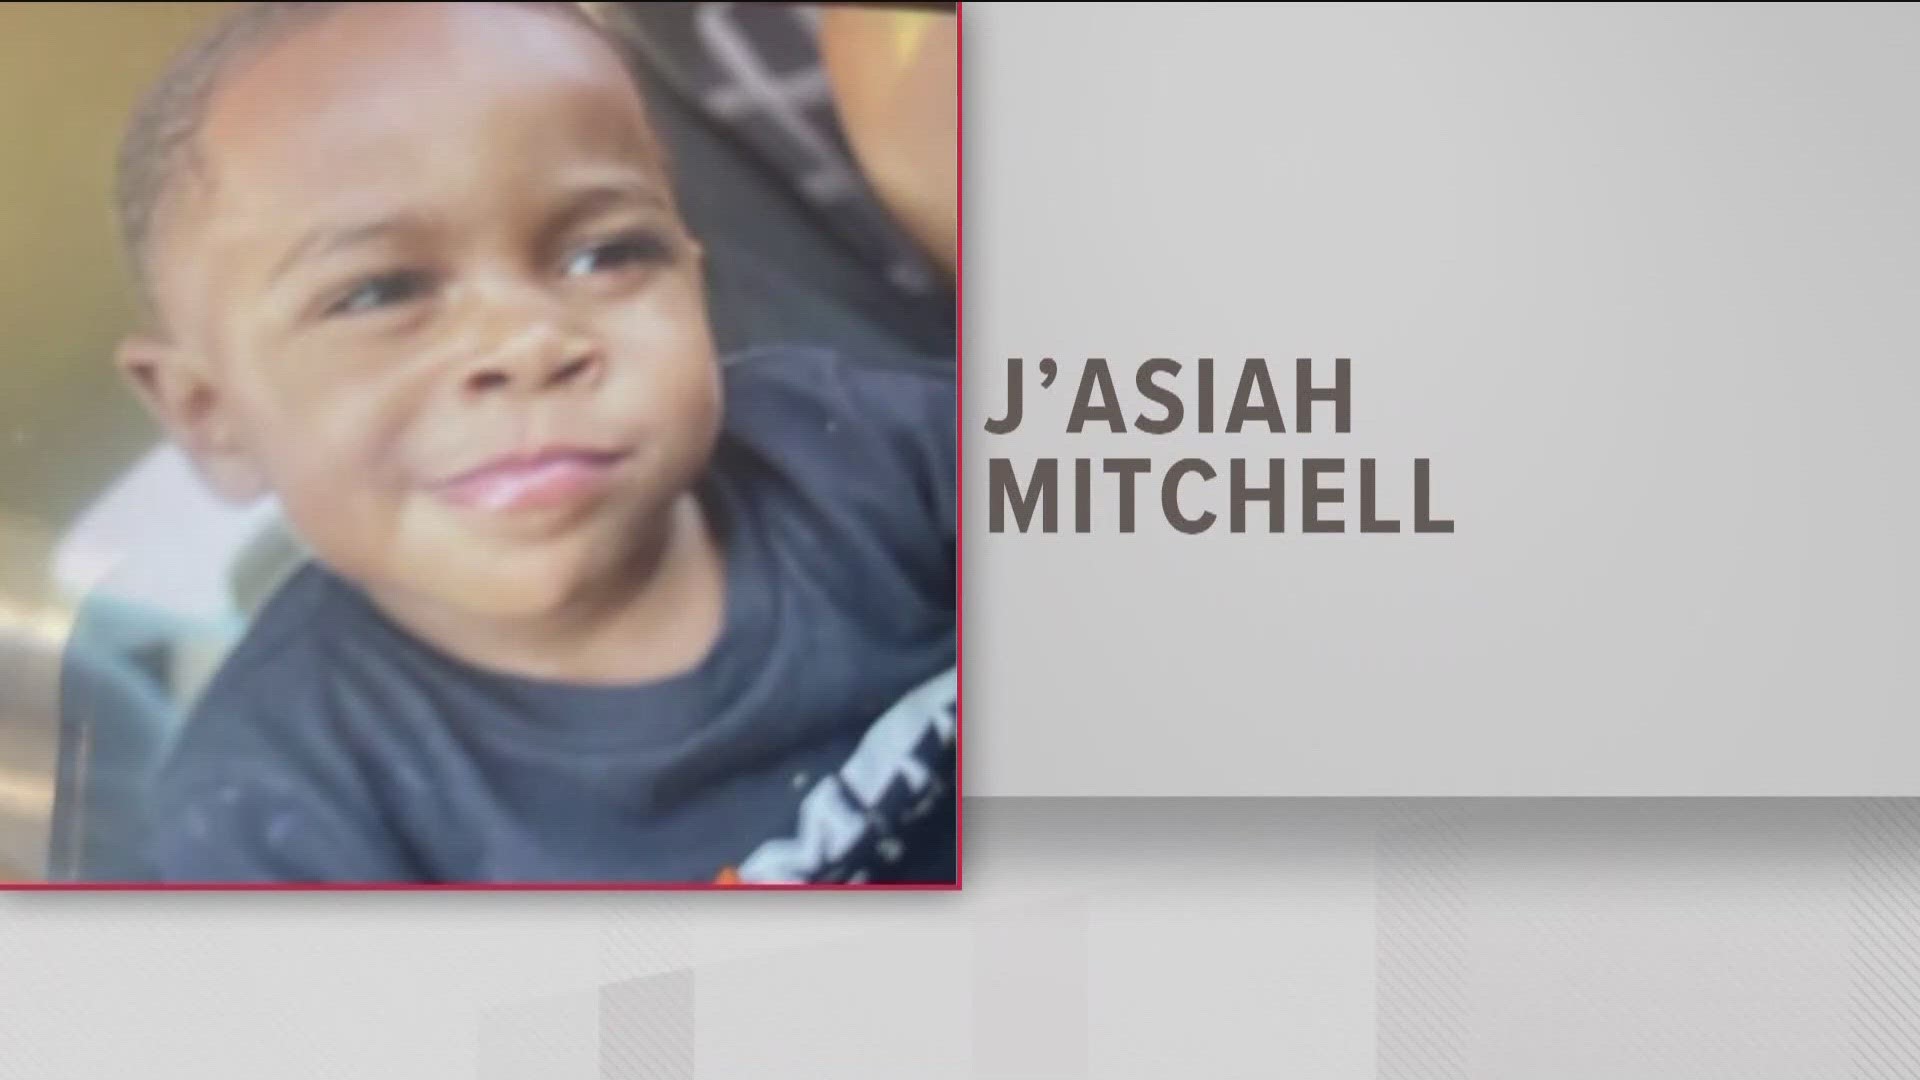 The case has taken several turns since J'Asiah Mitchell was first reported missing.